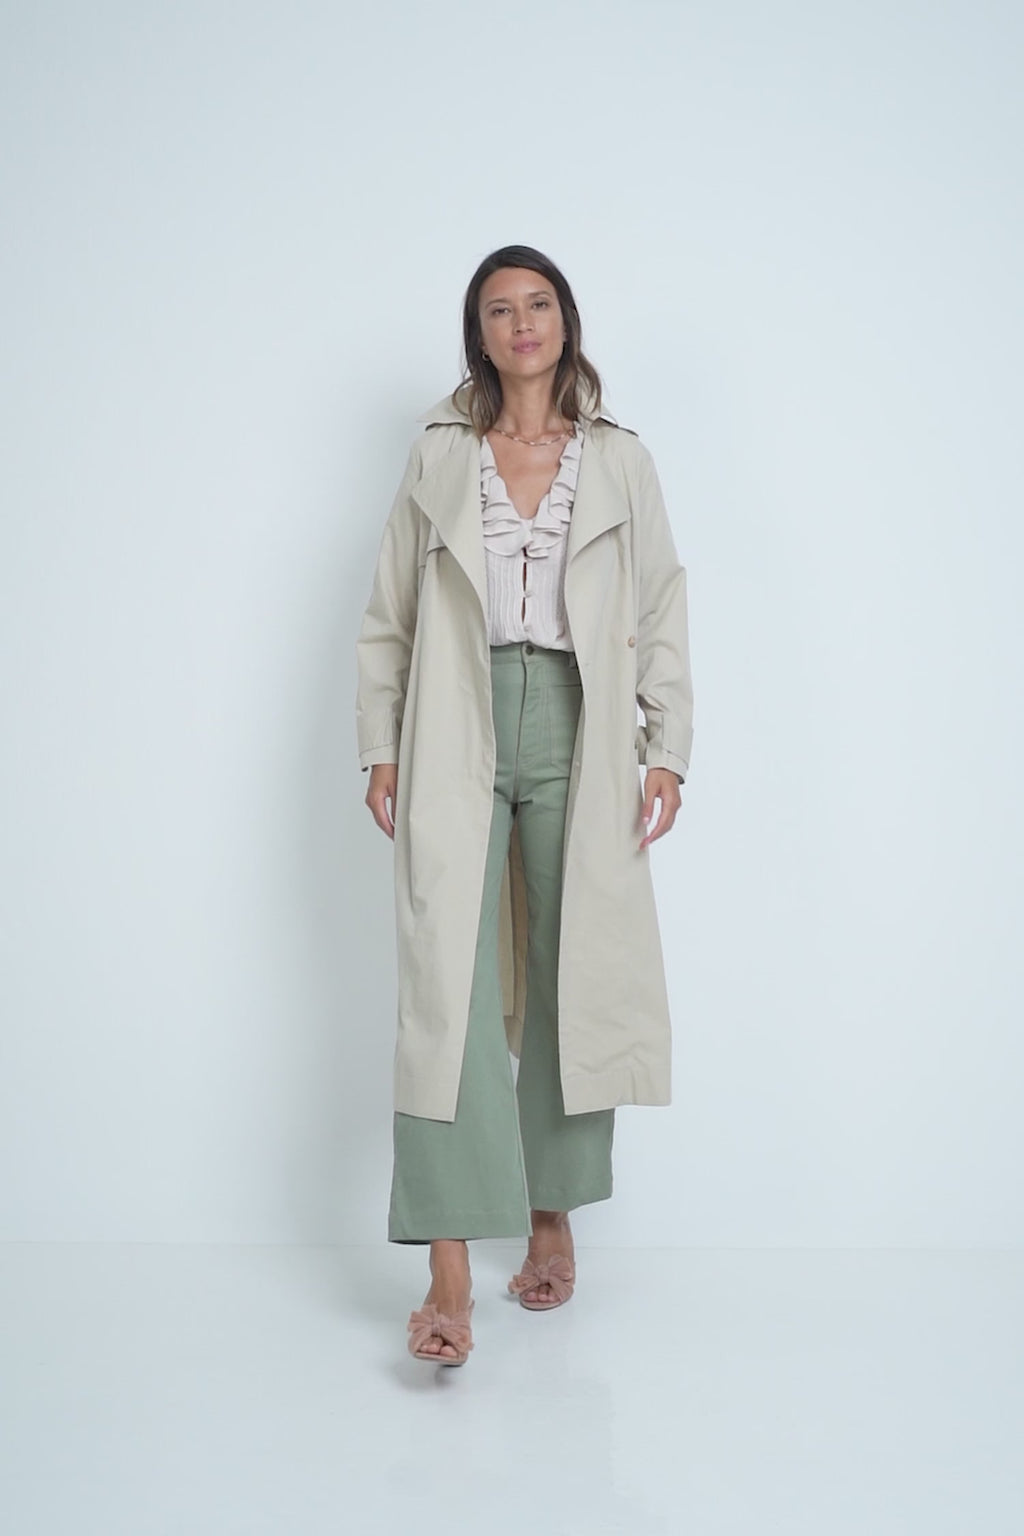 A Model Wearing a Trench Coat by LILYA